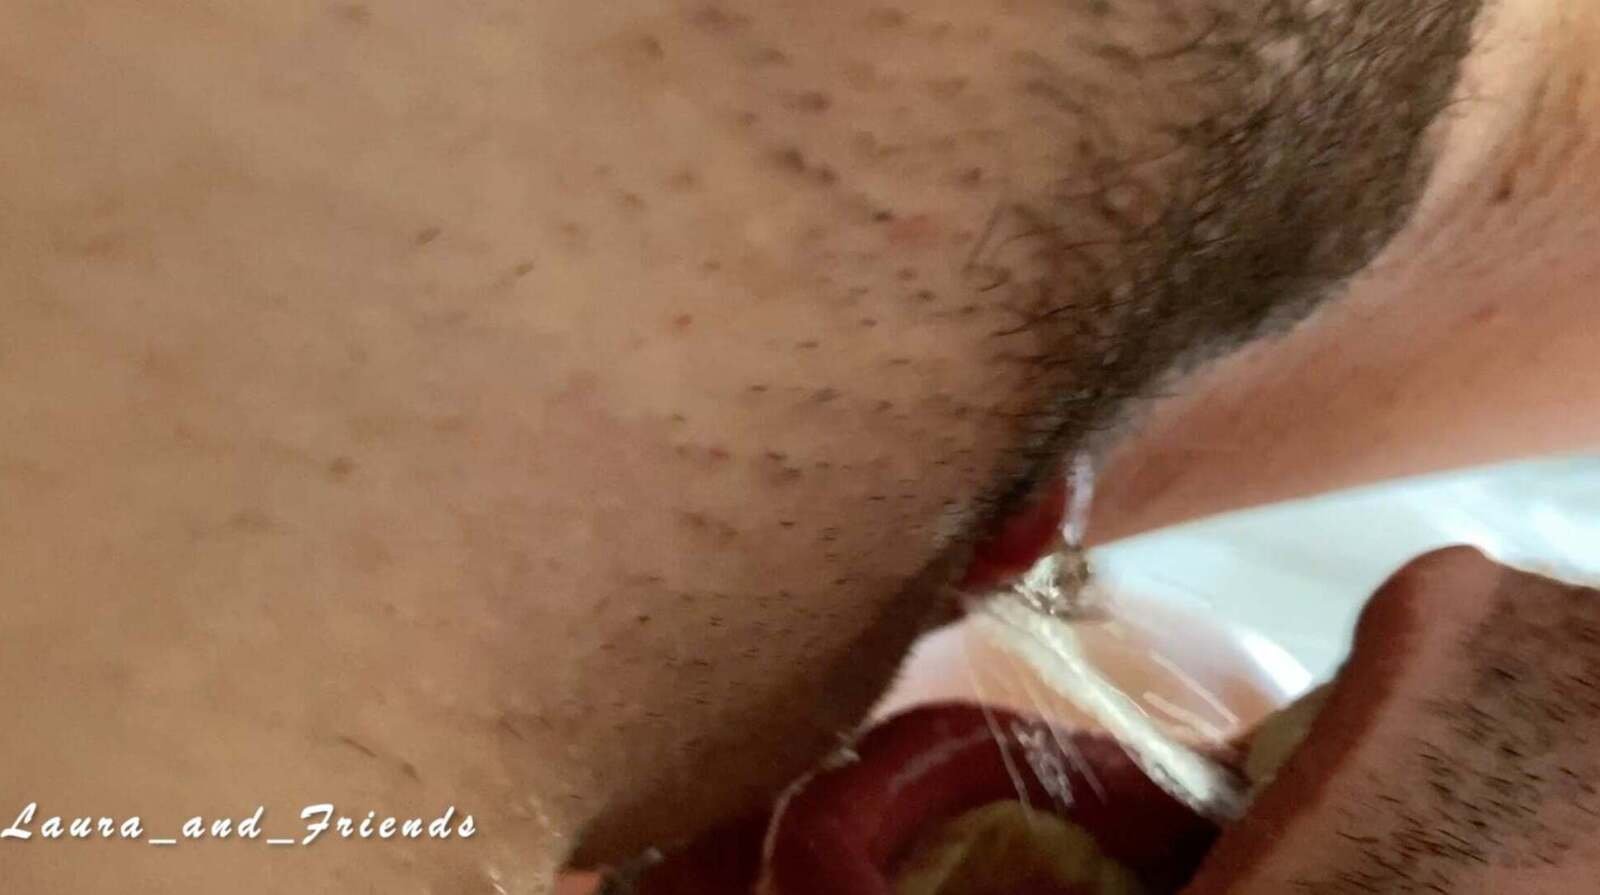 I squirt in her mouth while he eats my pussy